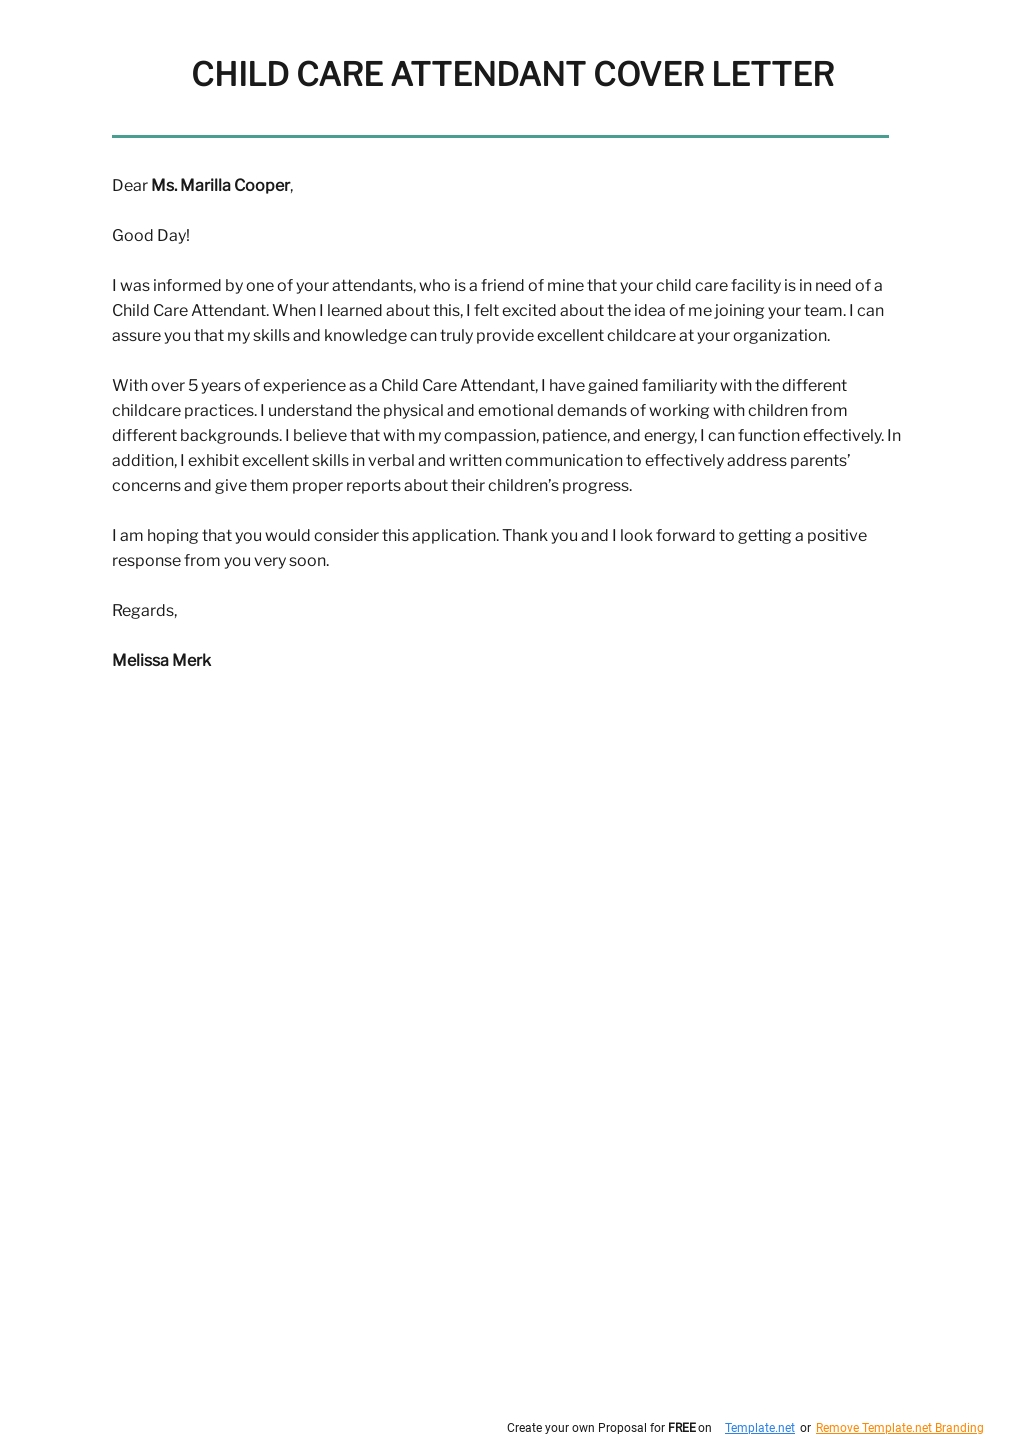 Free Child Care Attendant Cover Letter Template.jpe